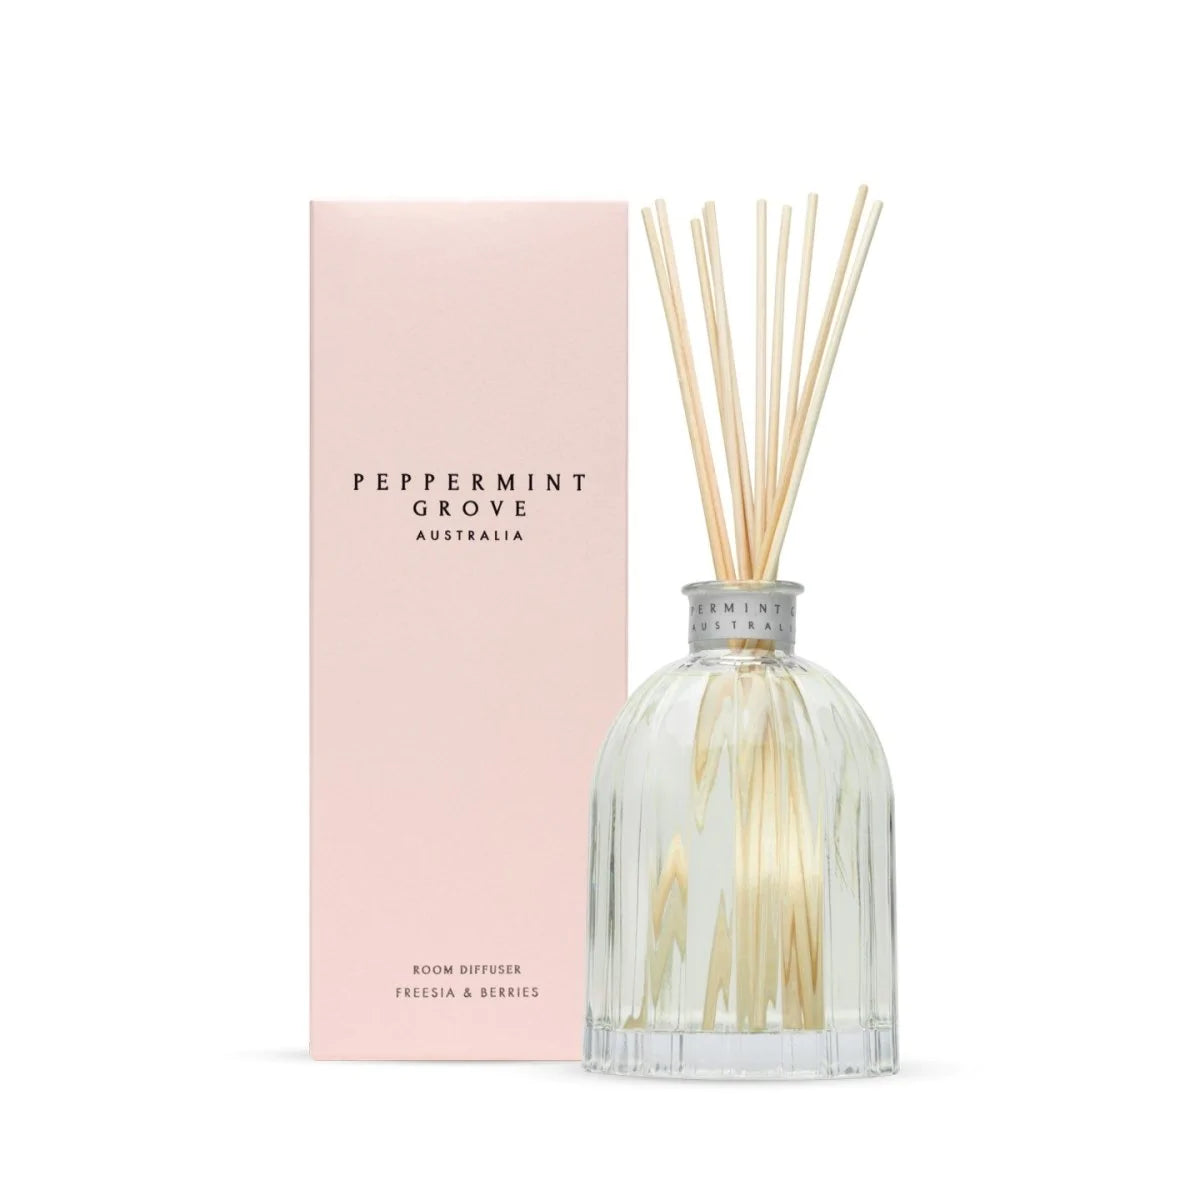 PEPPERMINT GROVE Fragrance Diffuser